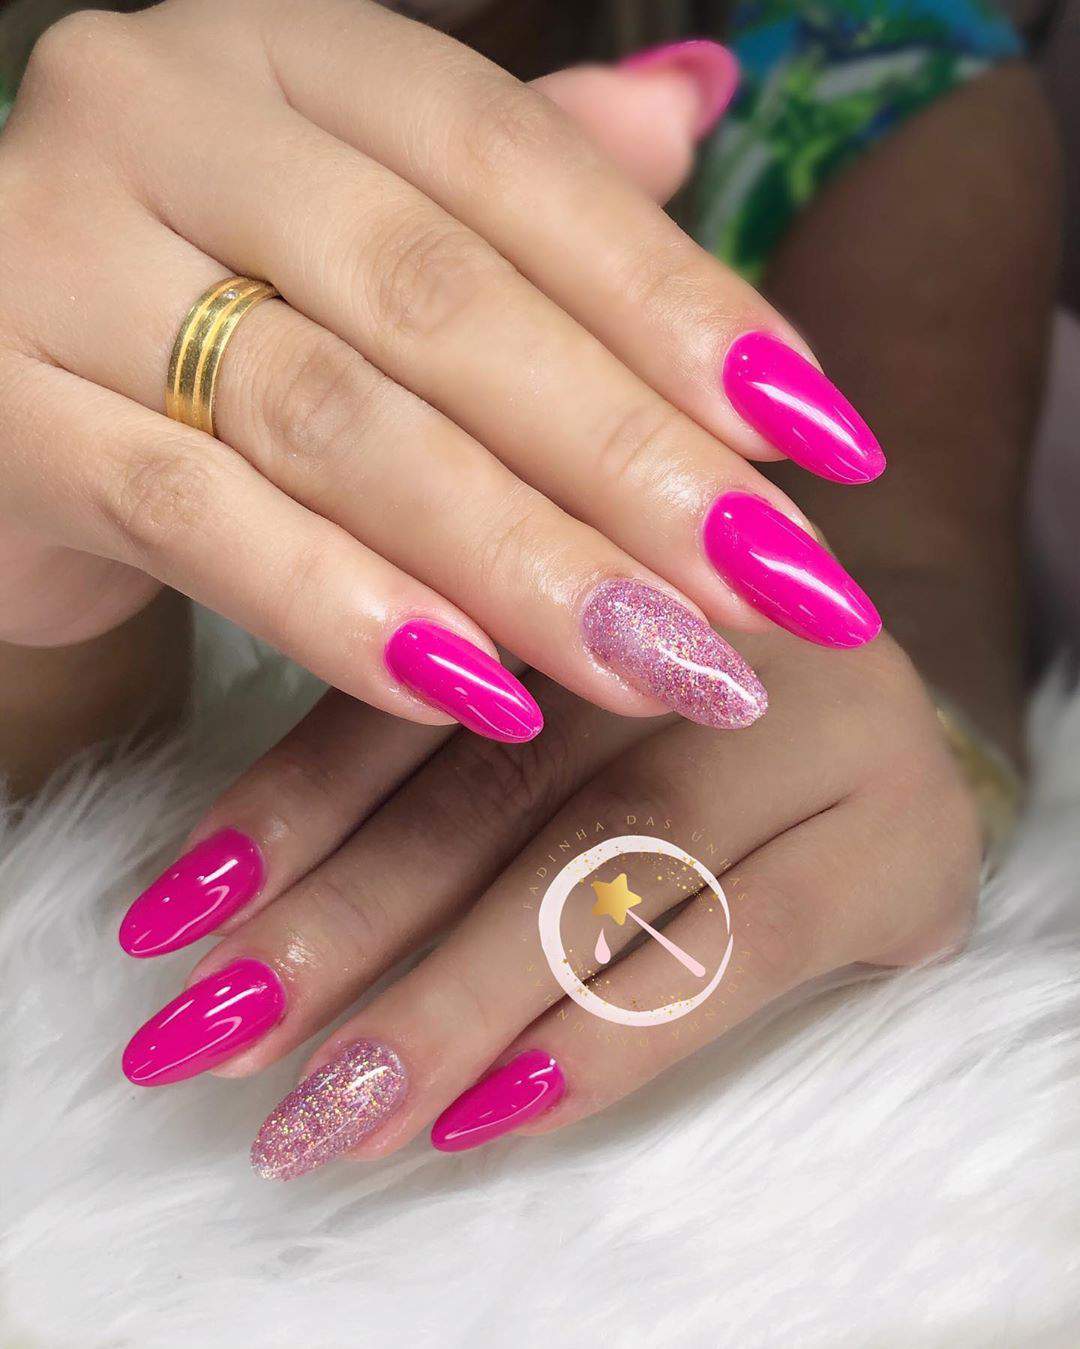 50 Best Nail Designs Trends To Try Out In 2022 images 12